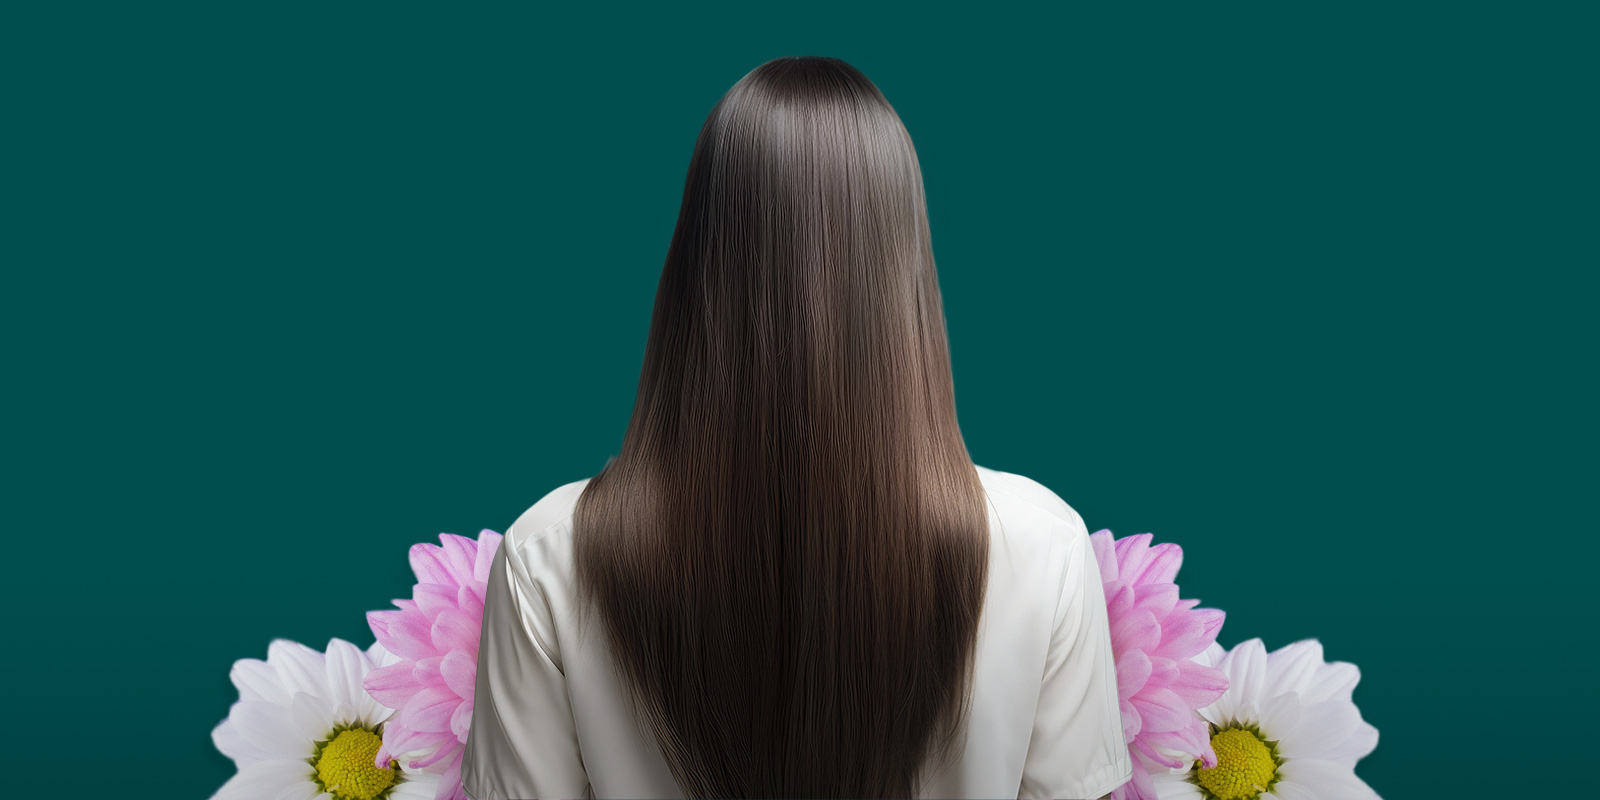 Everything you need to know about straight hair: tips and advice from the experts